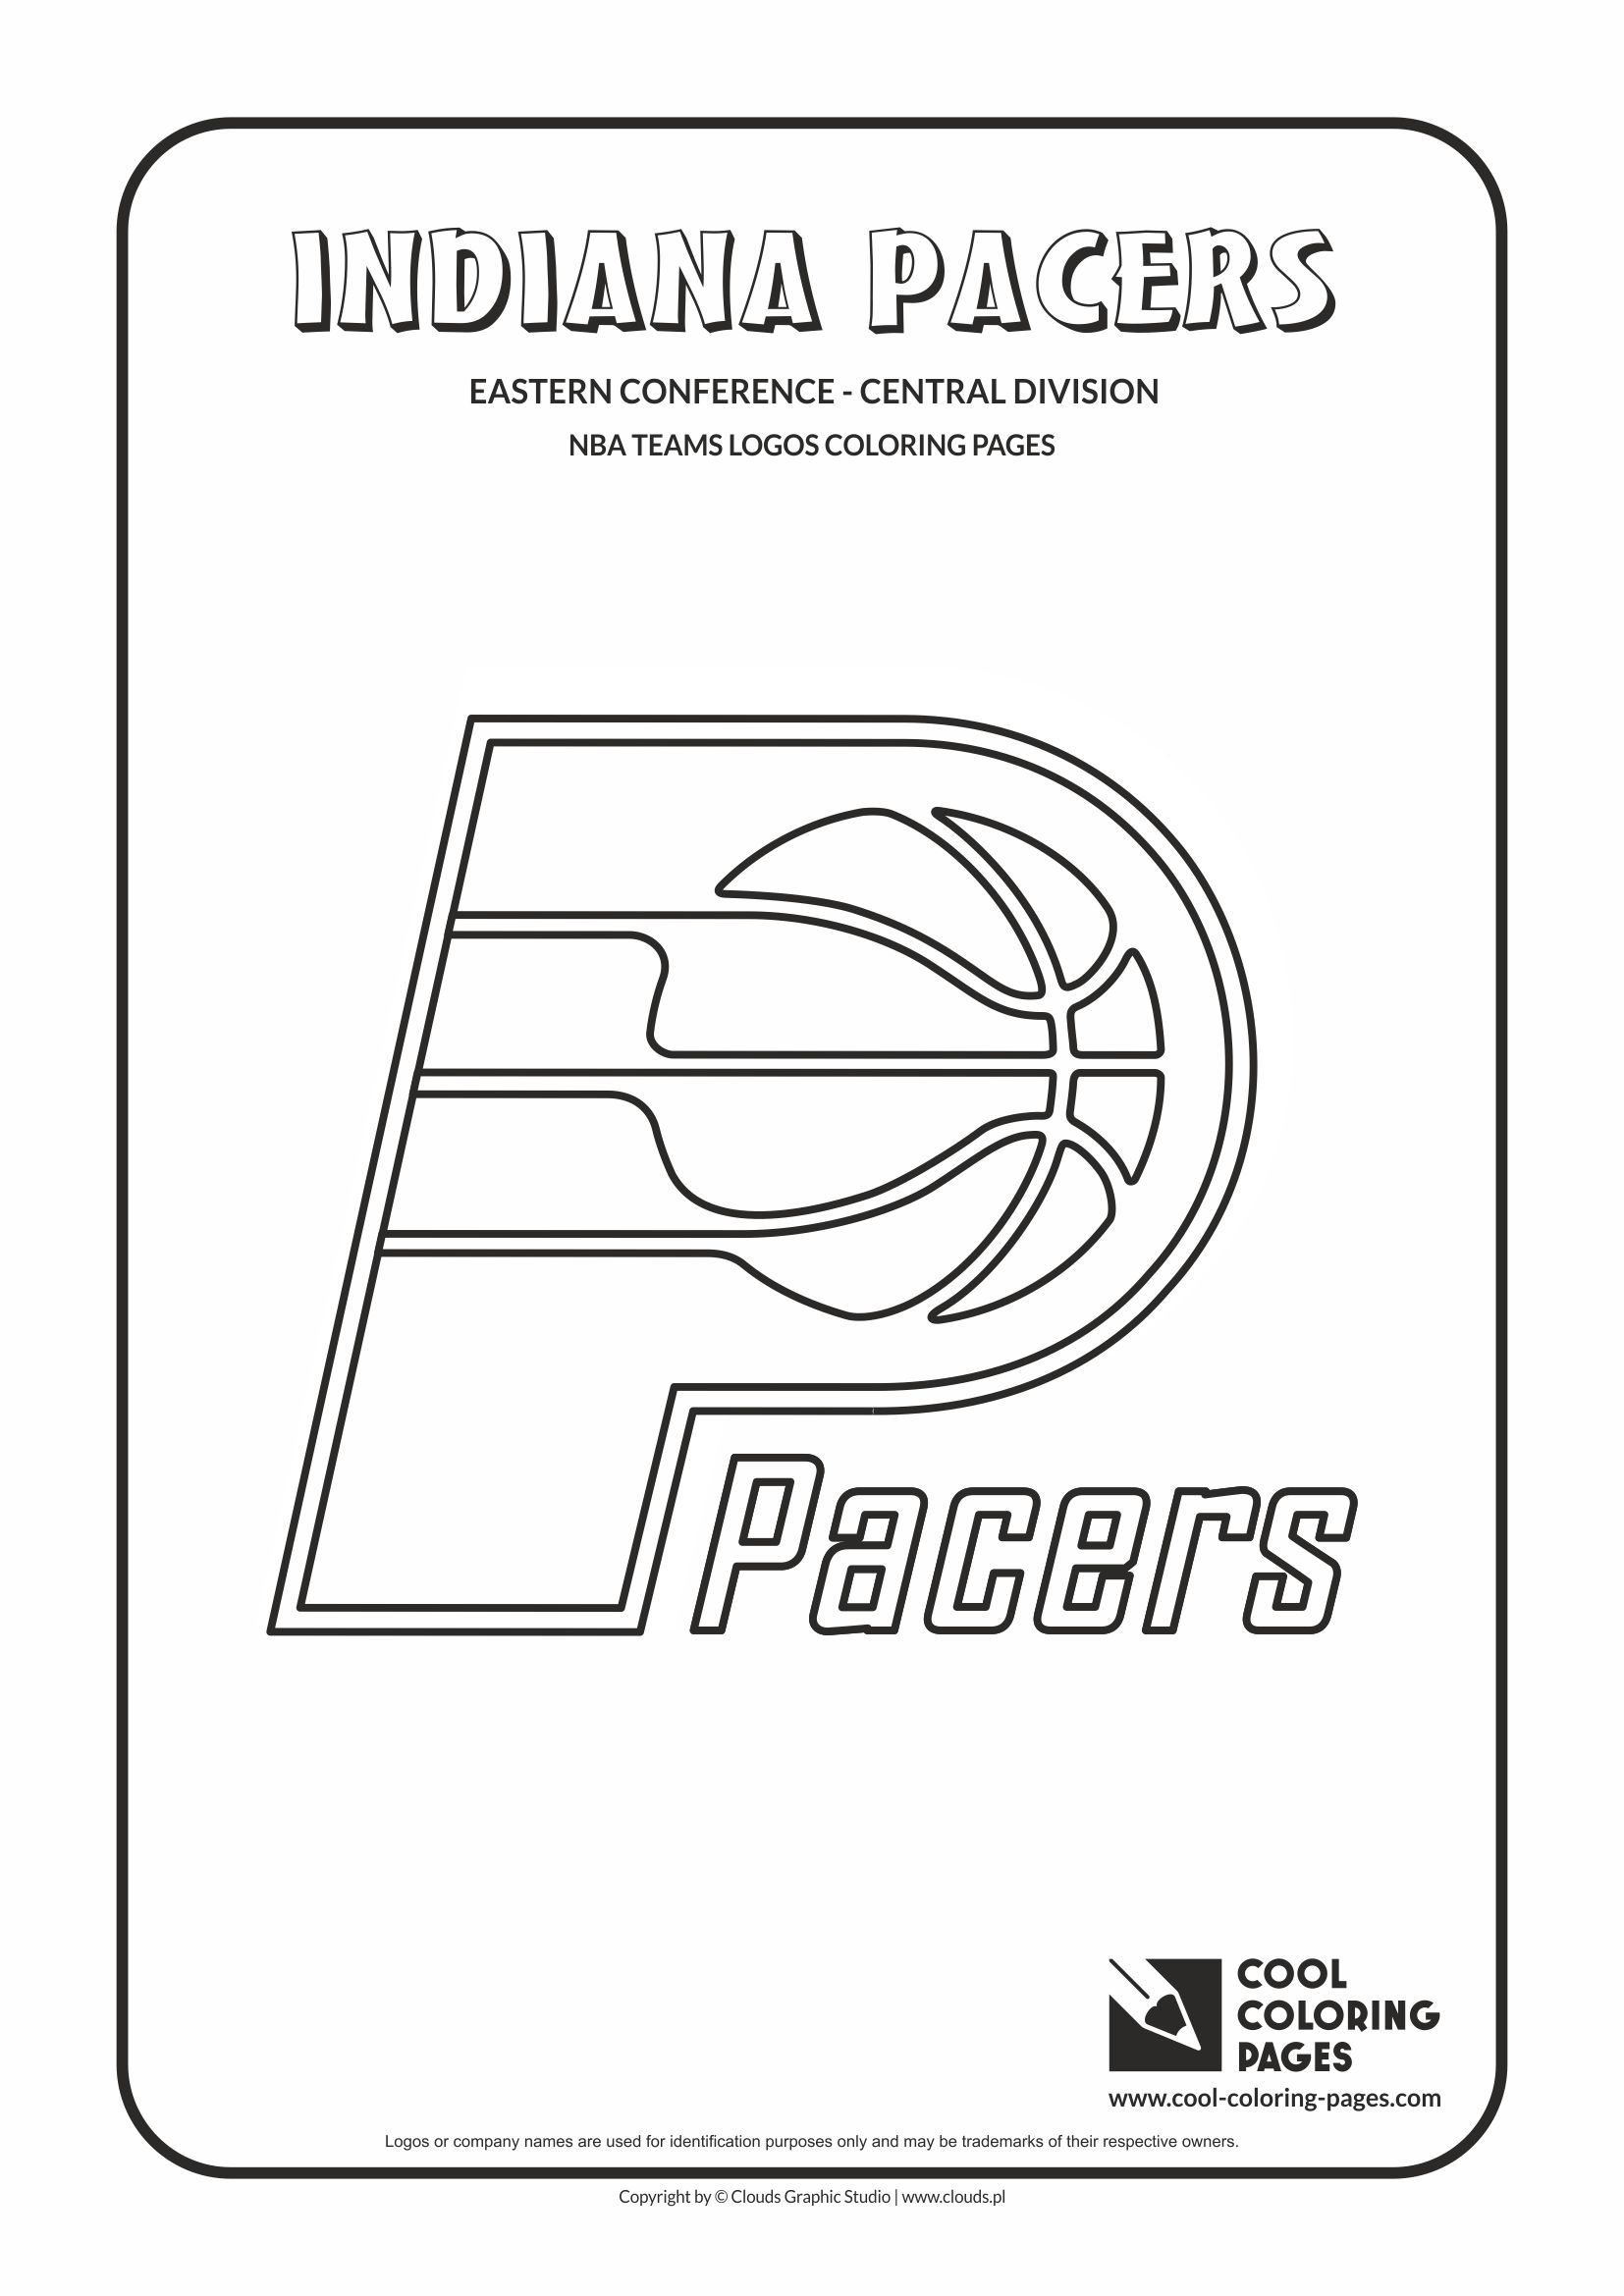 Cool Coloring Pages Indiana Pacers - NBA basketball teams logos coloring pages - Cool ...